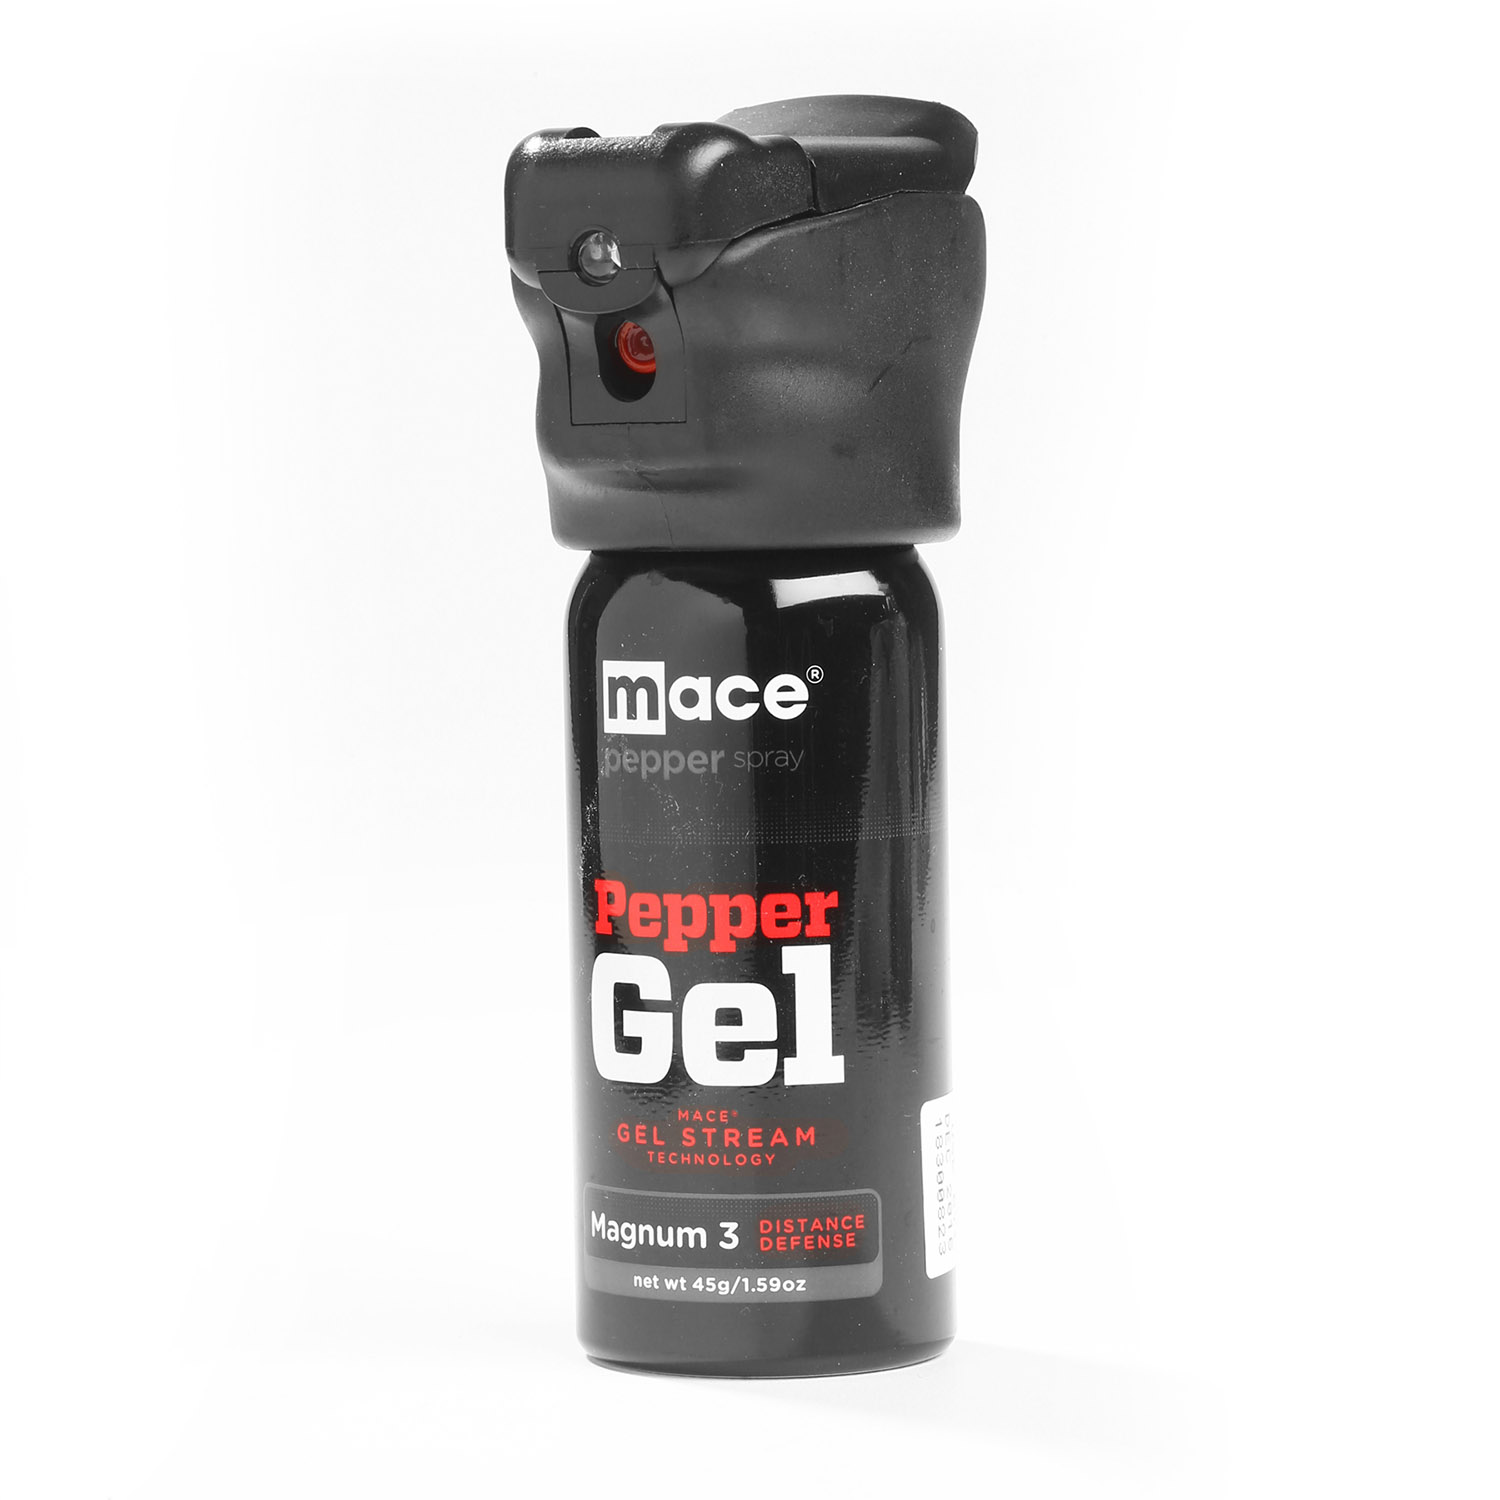 Mace MK-III Night Defender Pepper Spray with LED